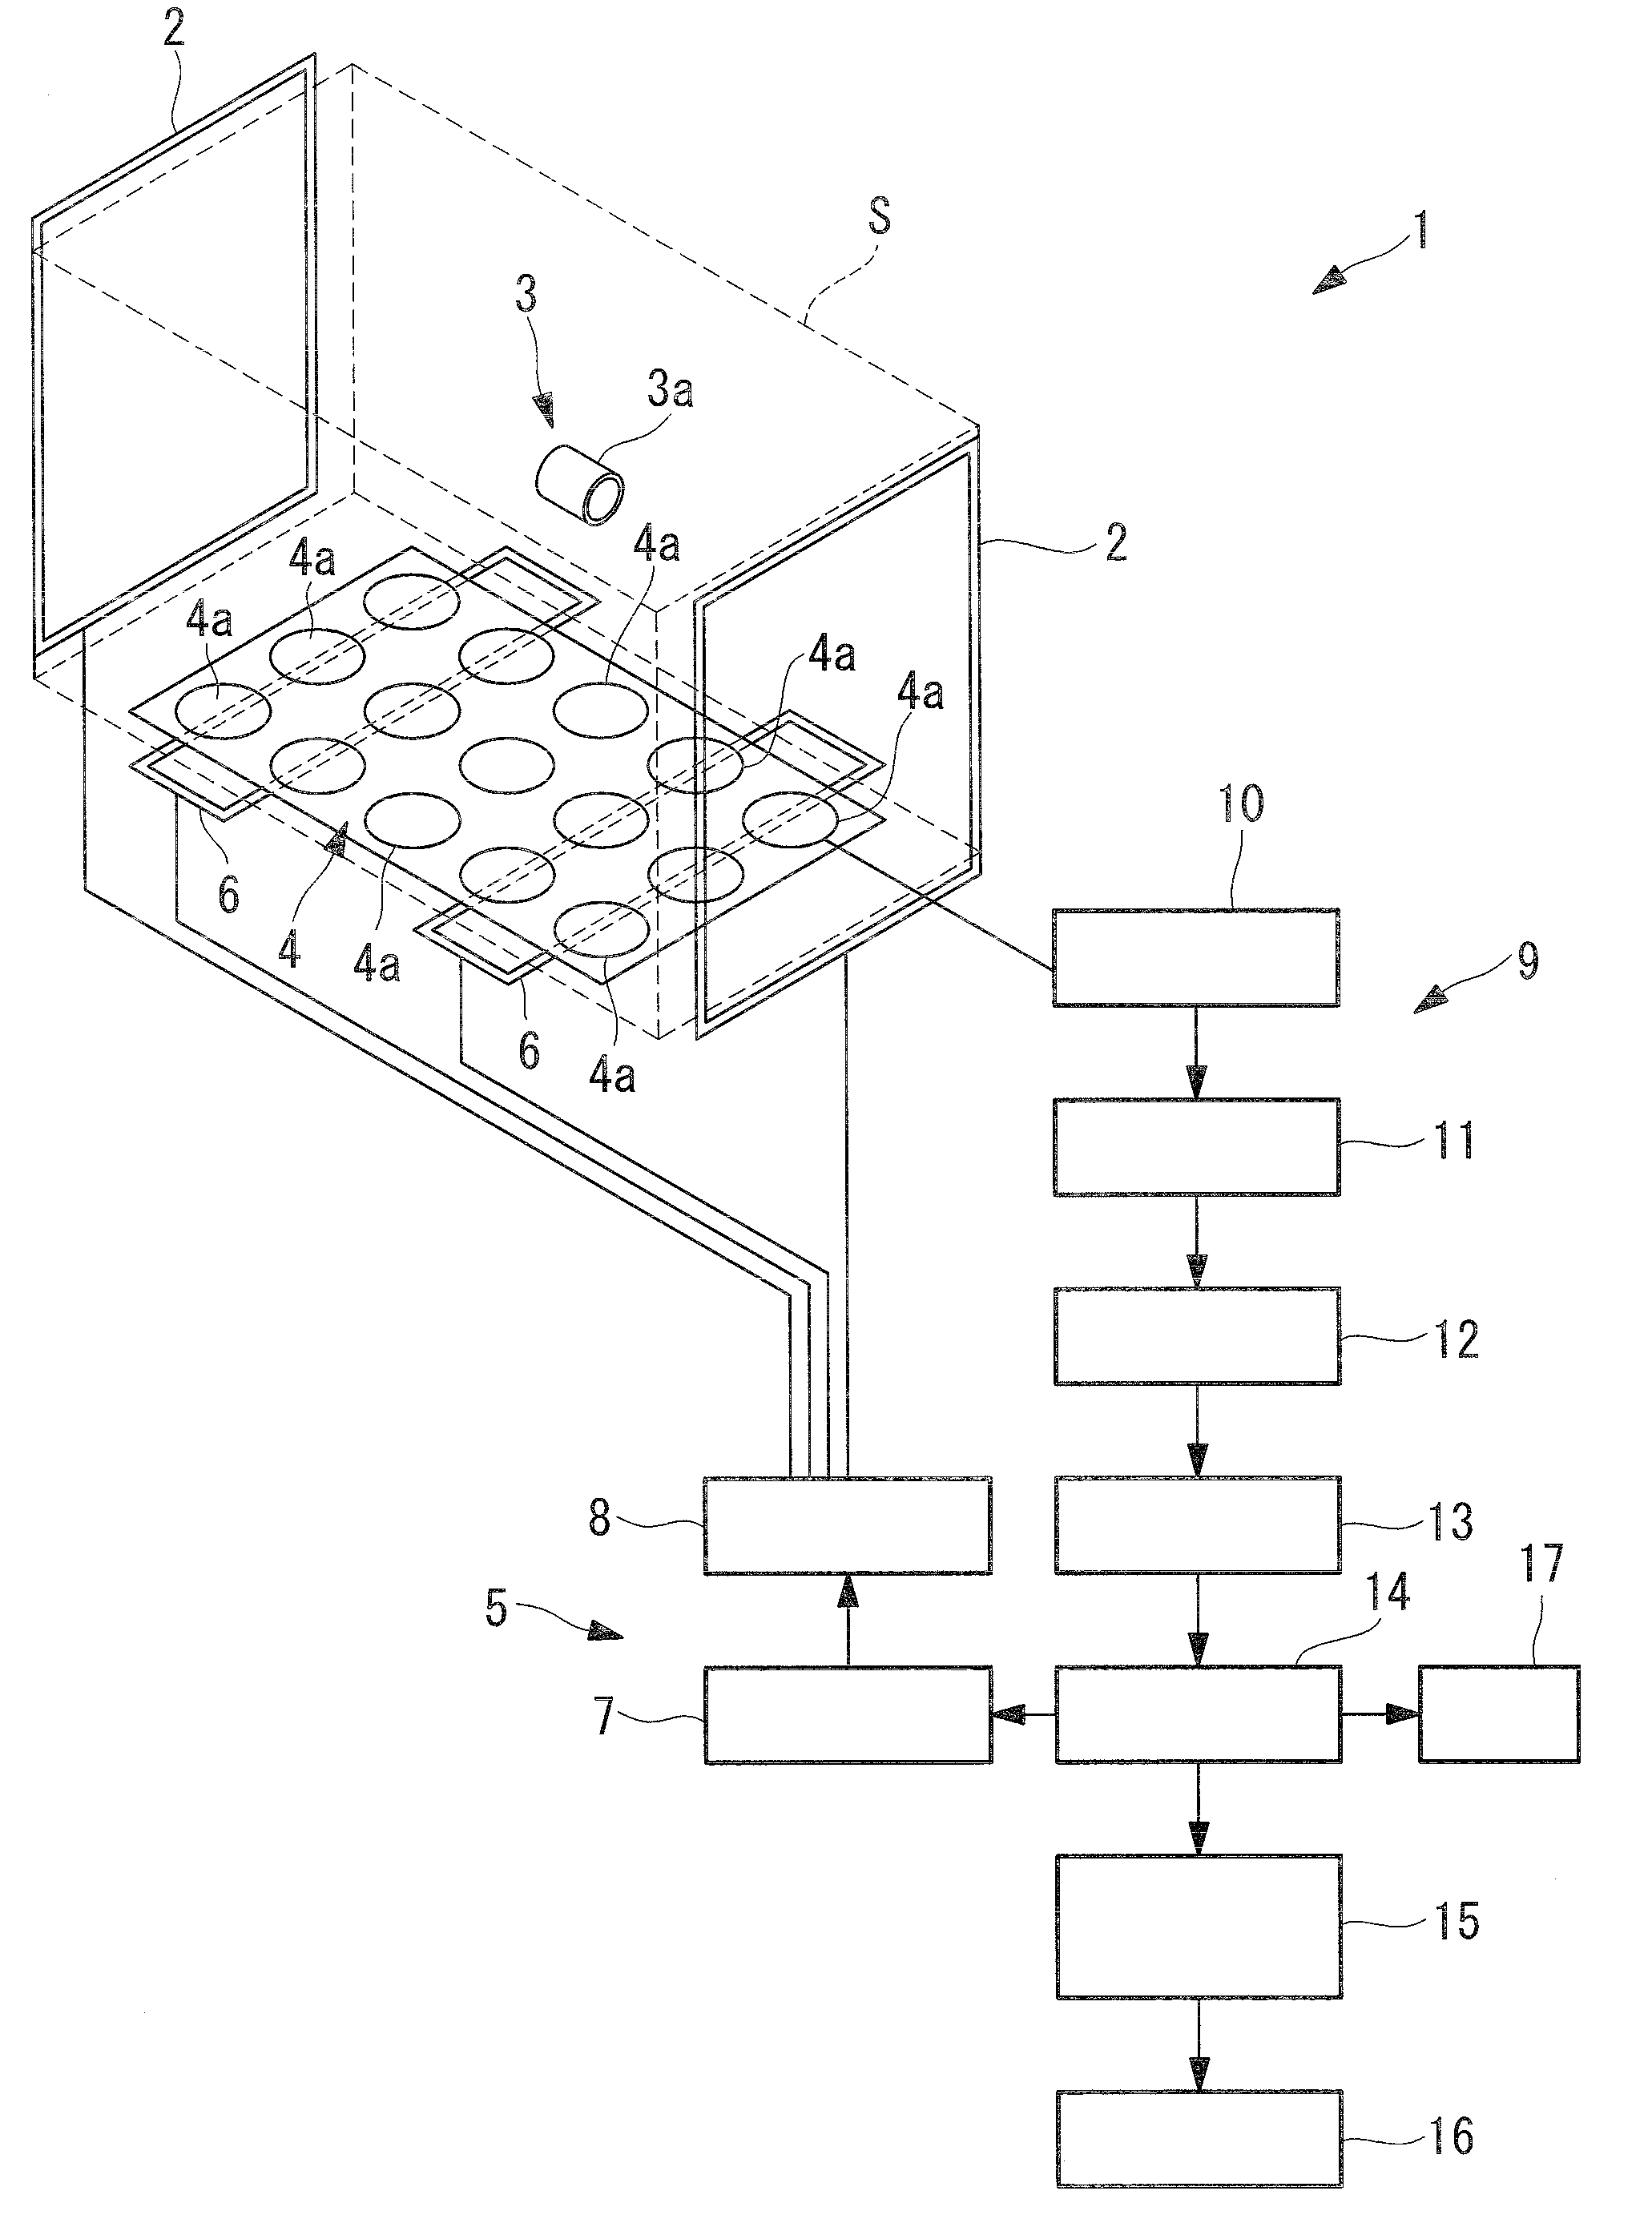 Position detecting device, medical device guiding system, position detecting method, and medical device guiding method